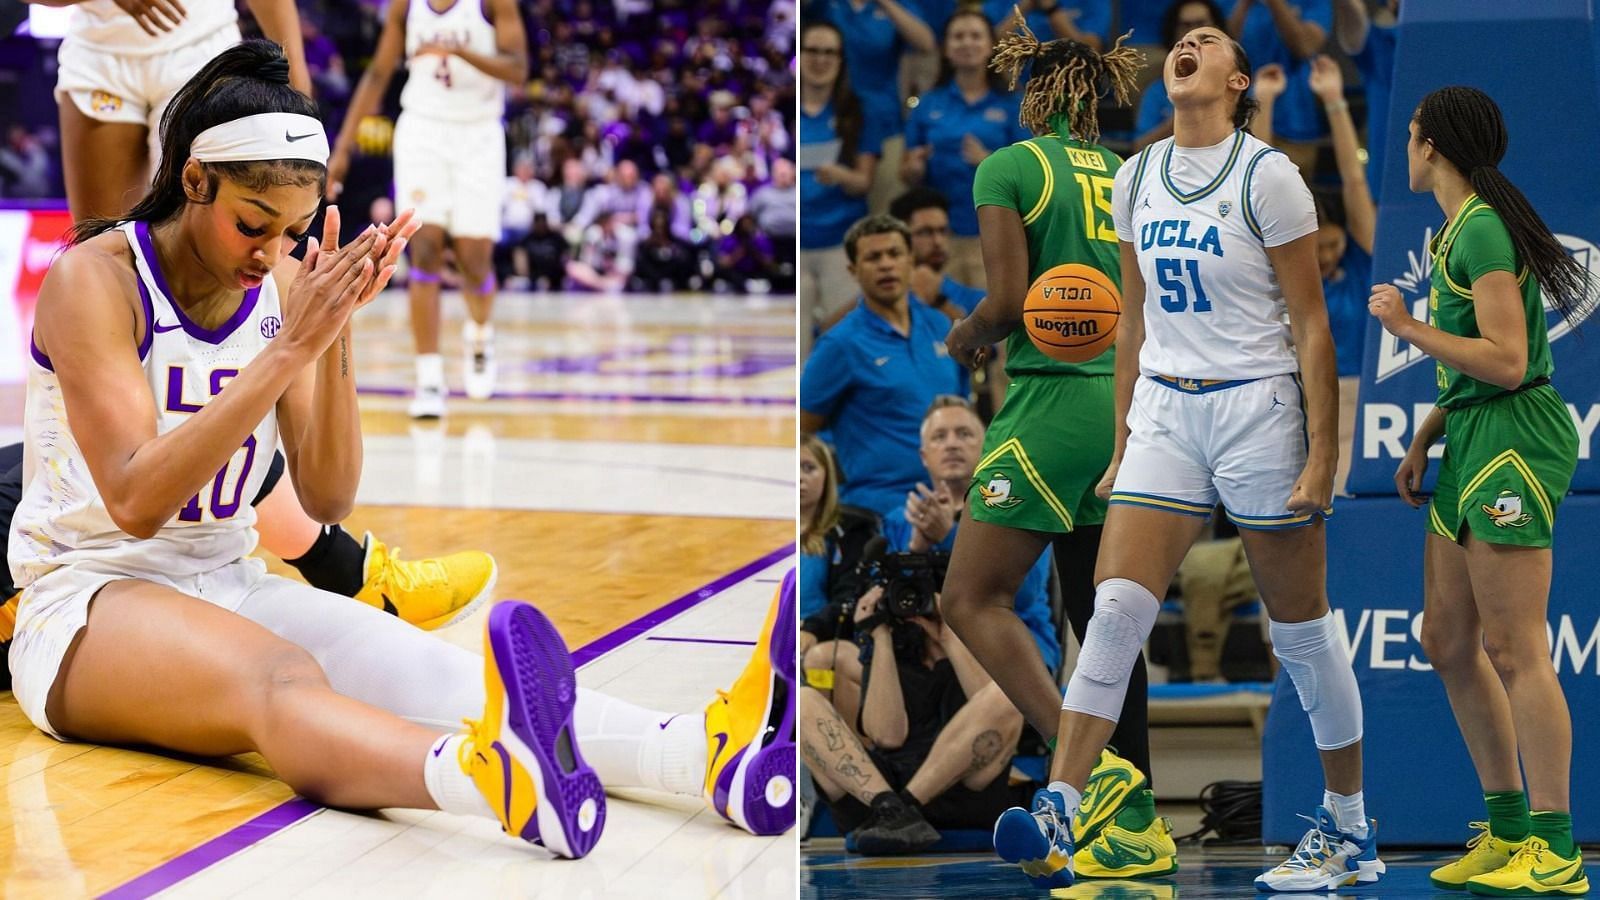 What happened to Angel Reese? $1.8M NIL-valued LSU superstar left with a bloody nose after hit from Lauren Betts